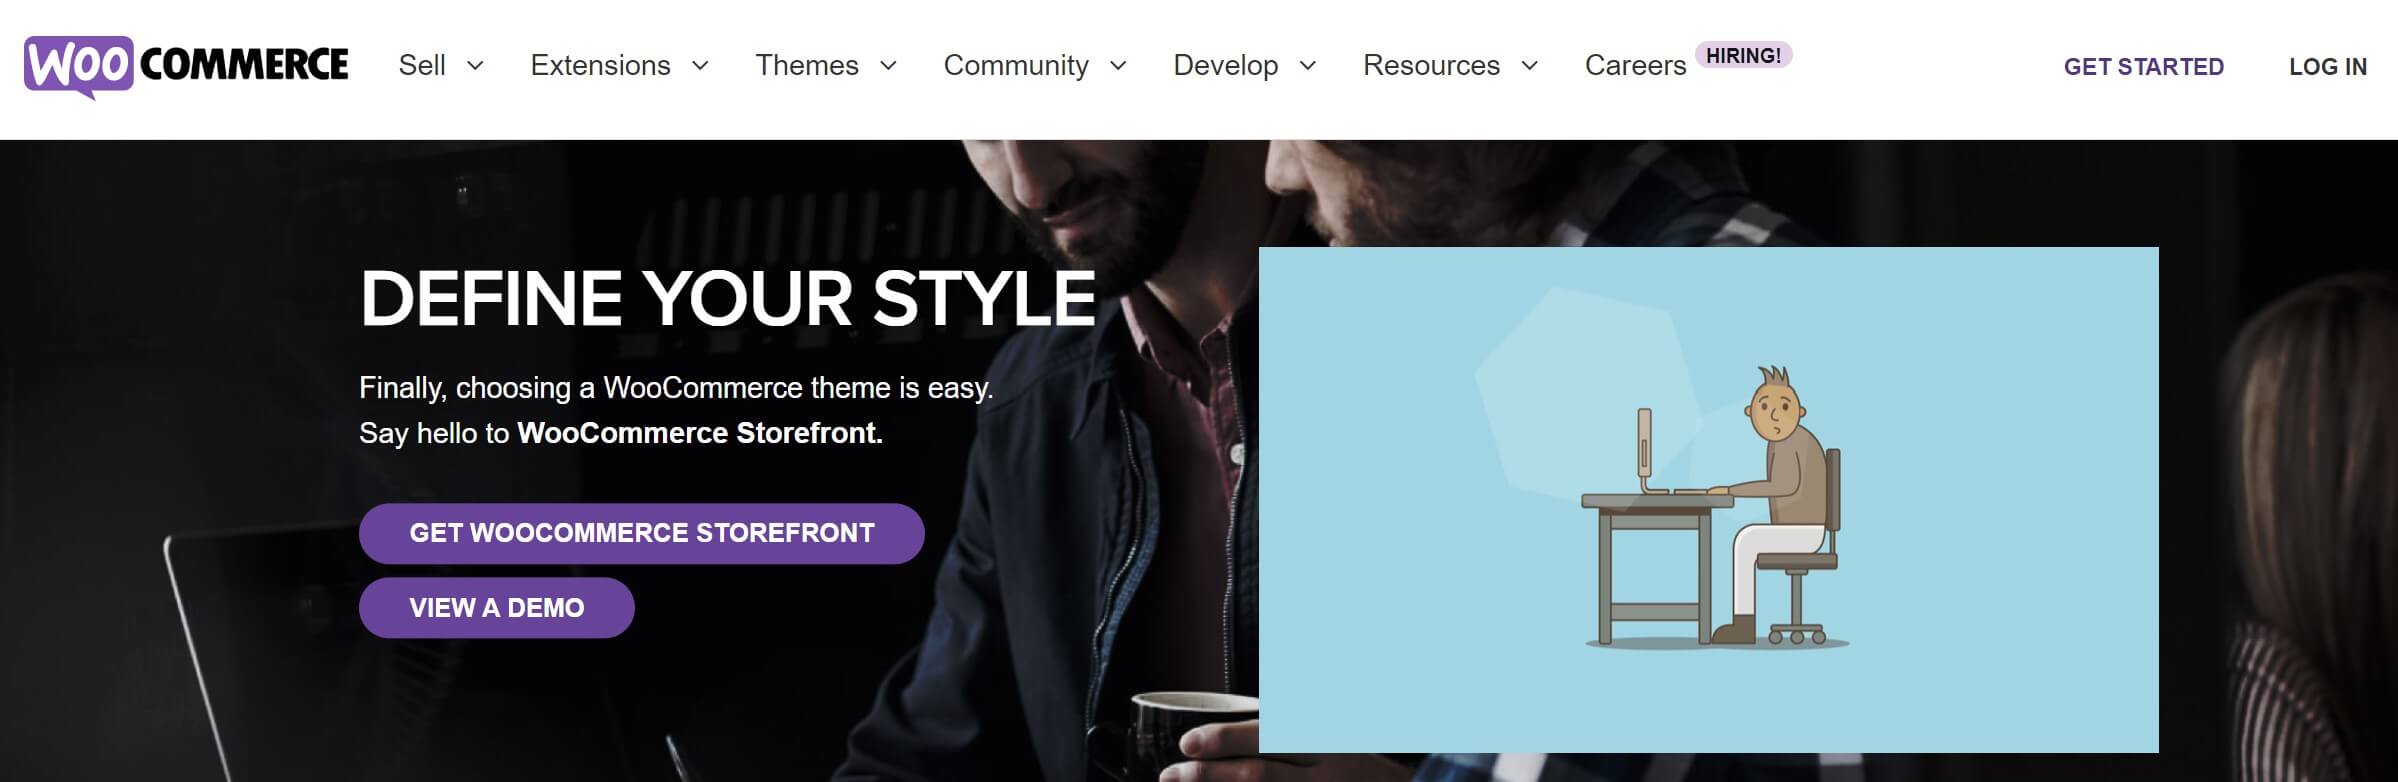 Storefront themes for WooCommerce optimization homepage